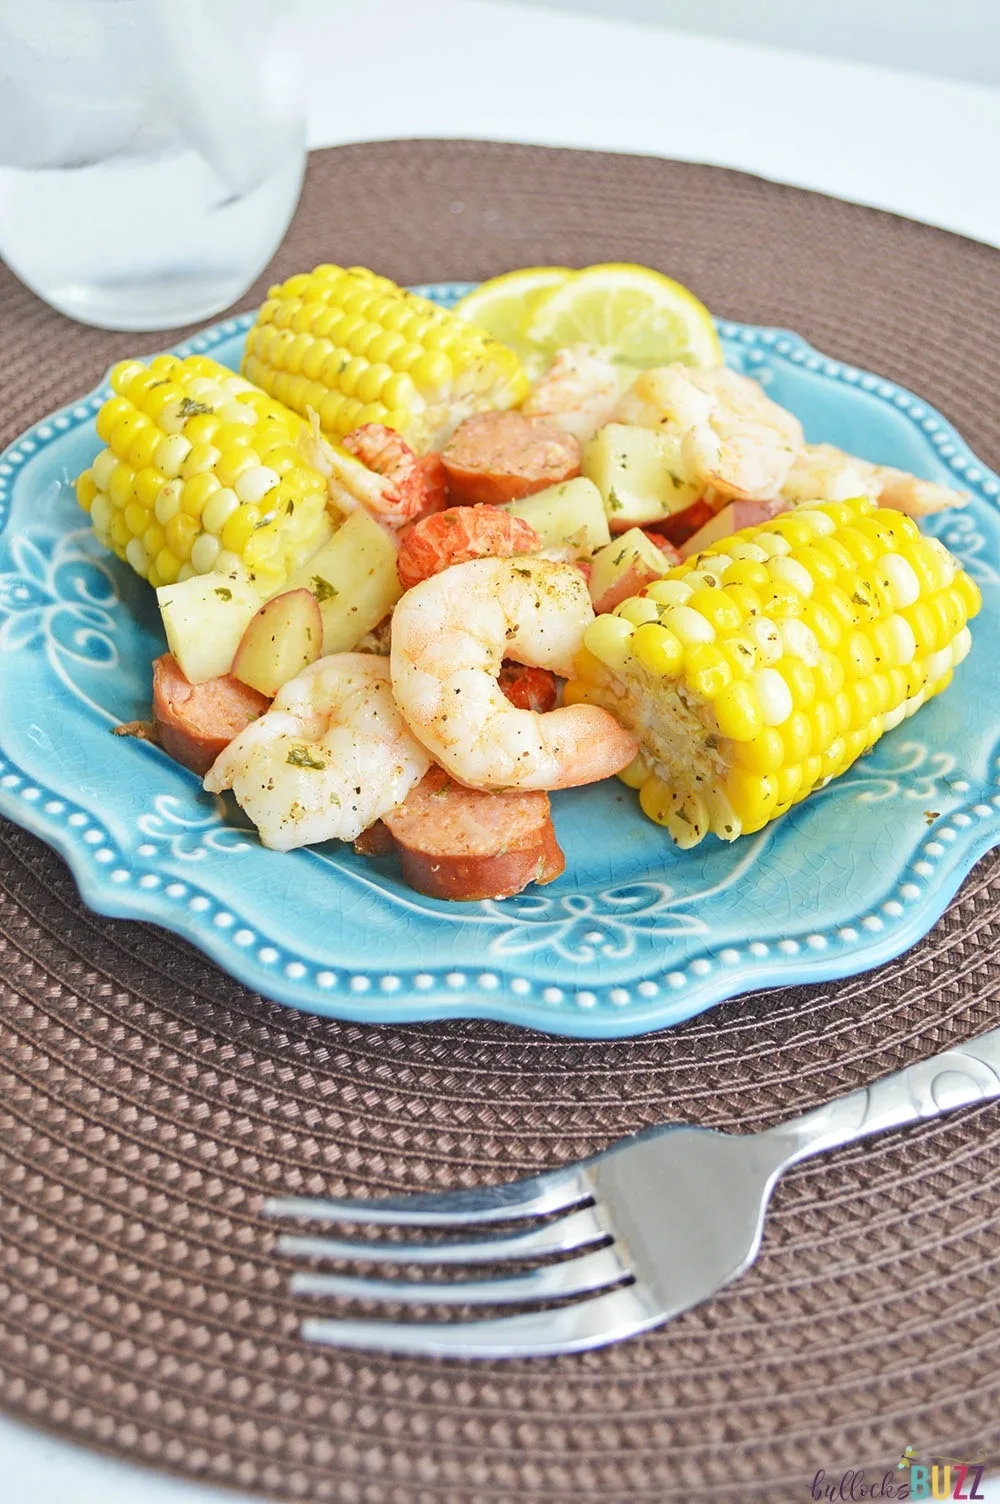 Filled with shrimp, crawfish, sausage, corn, and potatoes, these easy Cajun Seafood Boil Foil Packets are packed with flavor and have just the right amount of heat.